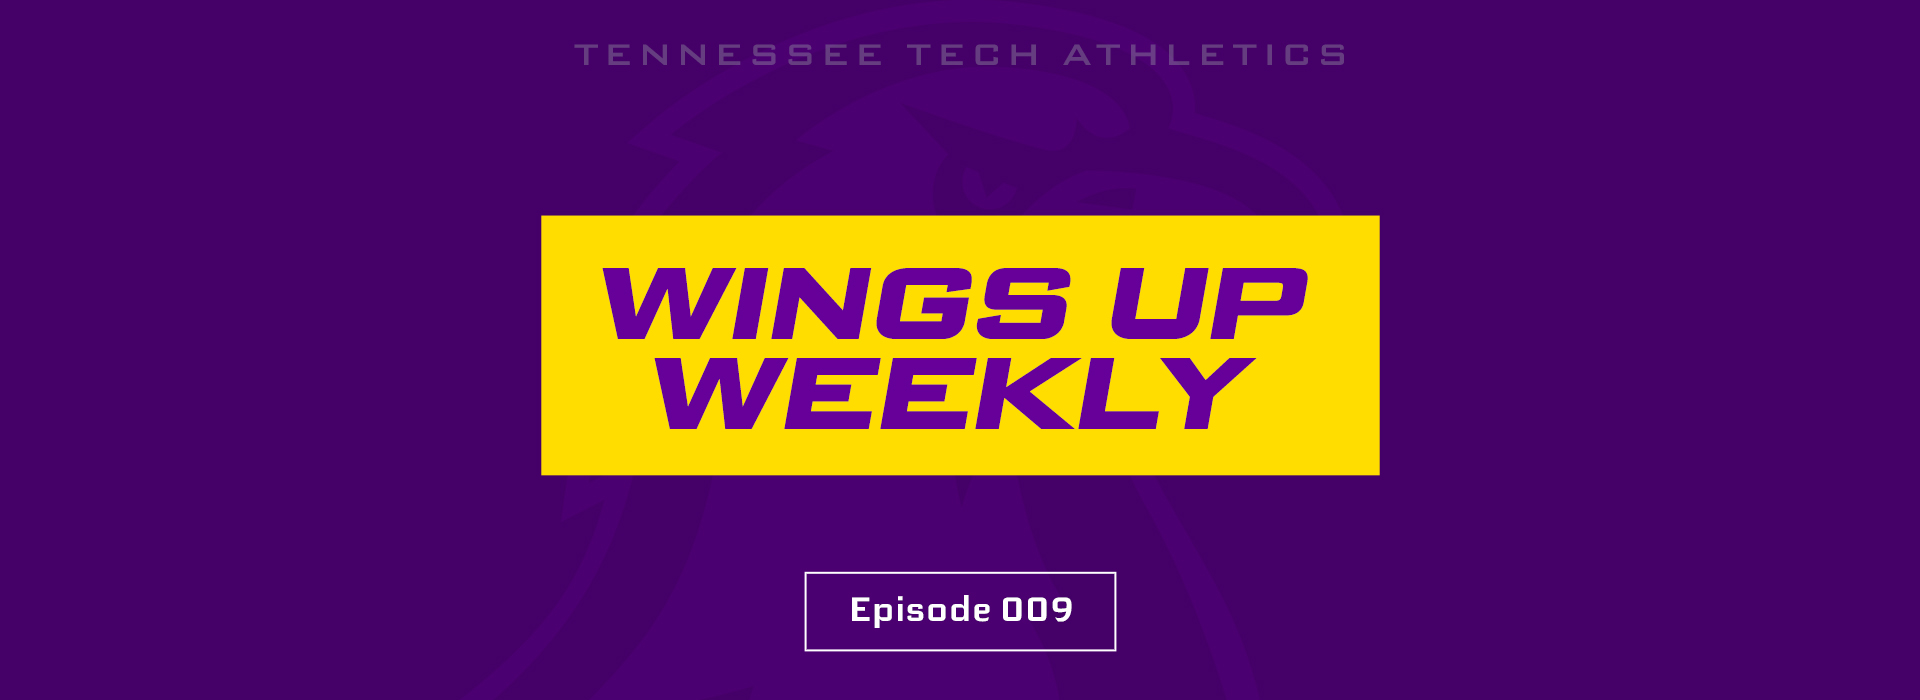 Wings Up Weekly: Episode 009 - featuring former Tech baseball stars Chase Chambers, Ethan Roberts & Kevin Strohschein